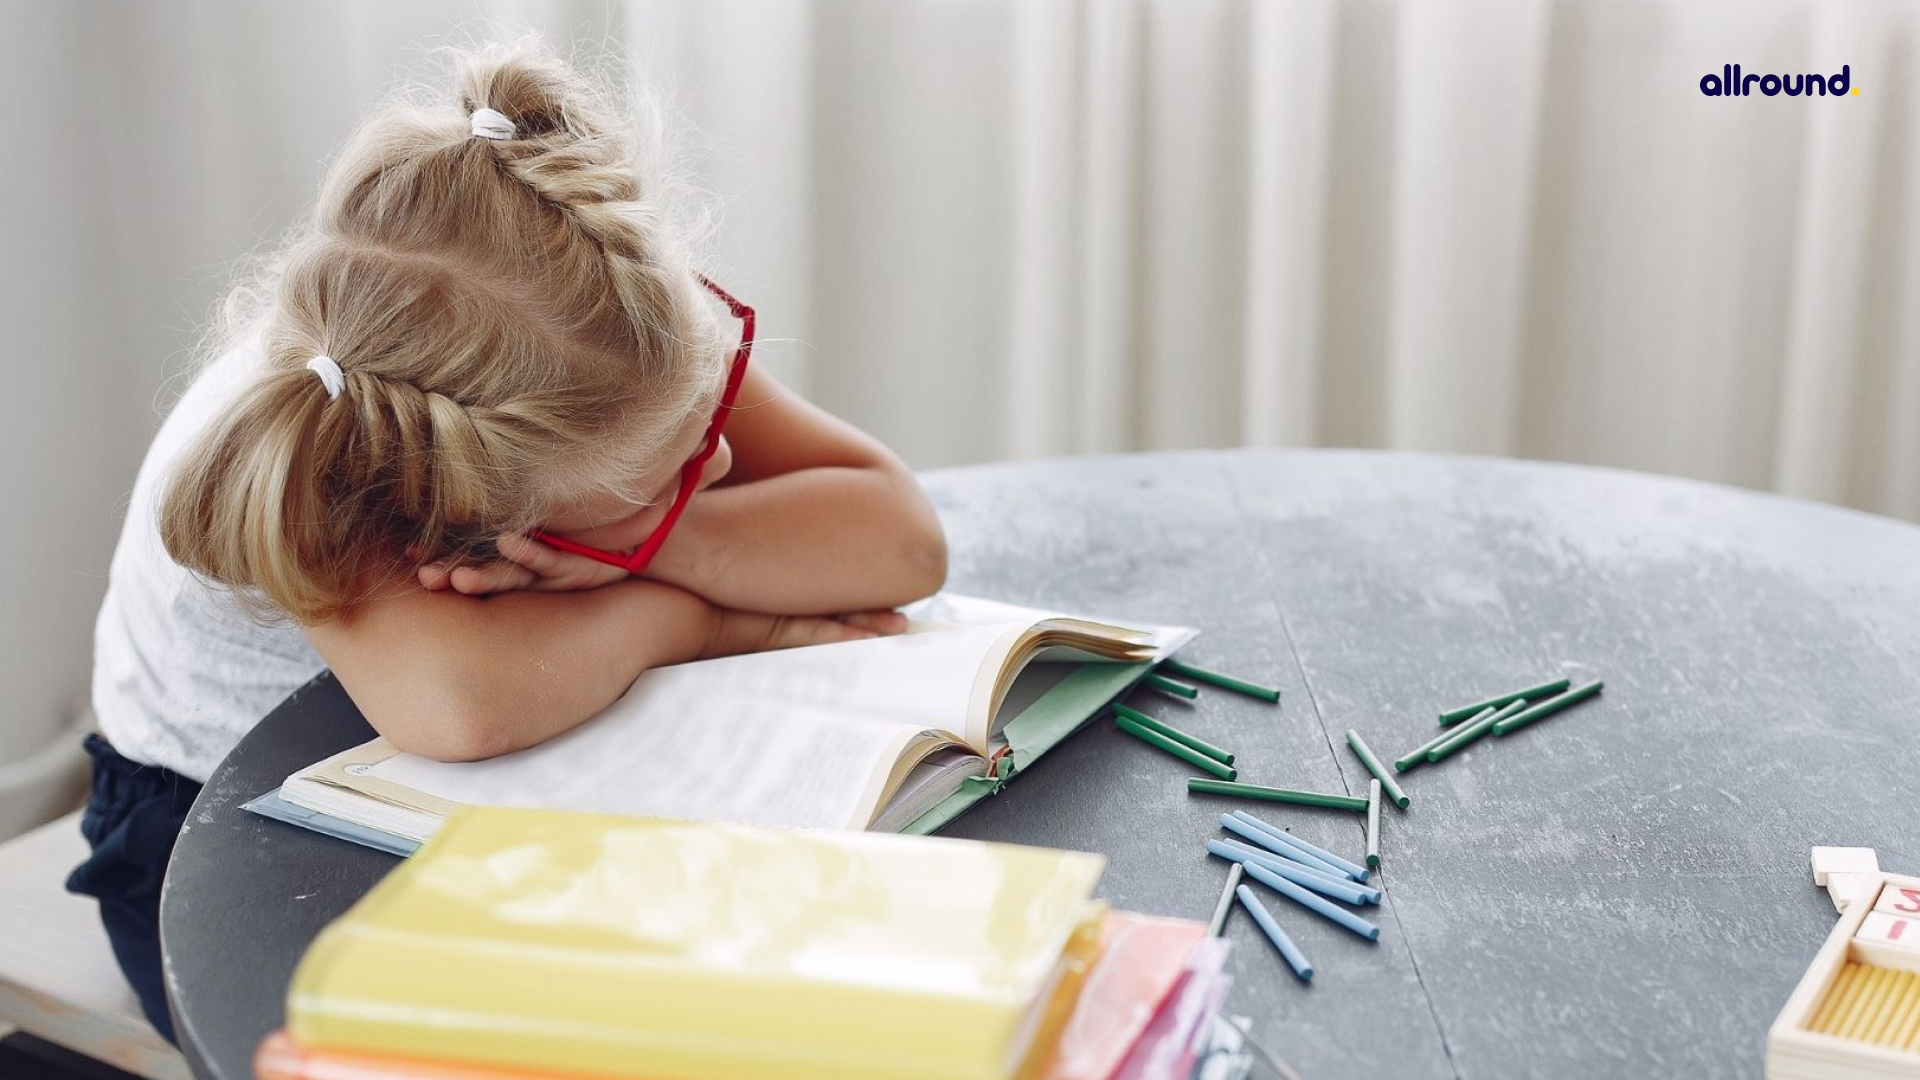 What to Do When Your Homeschool Feels Boring?